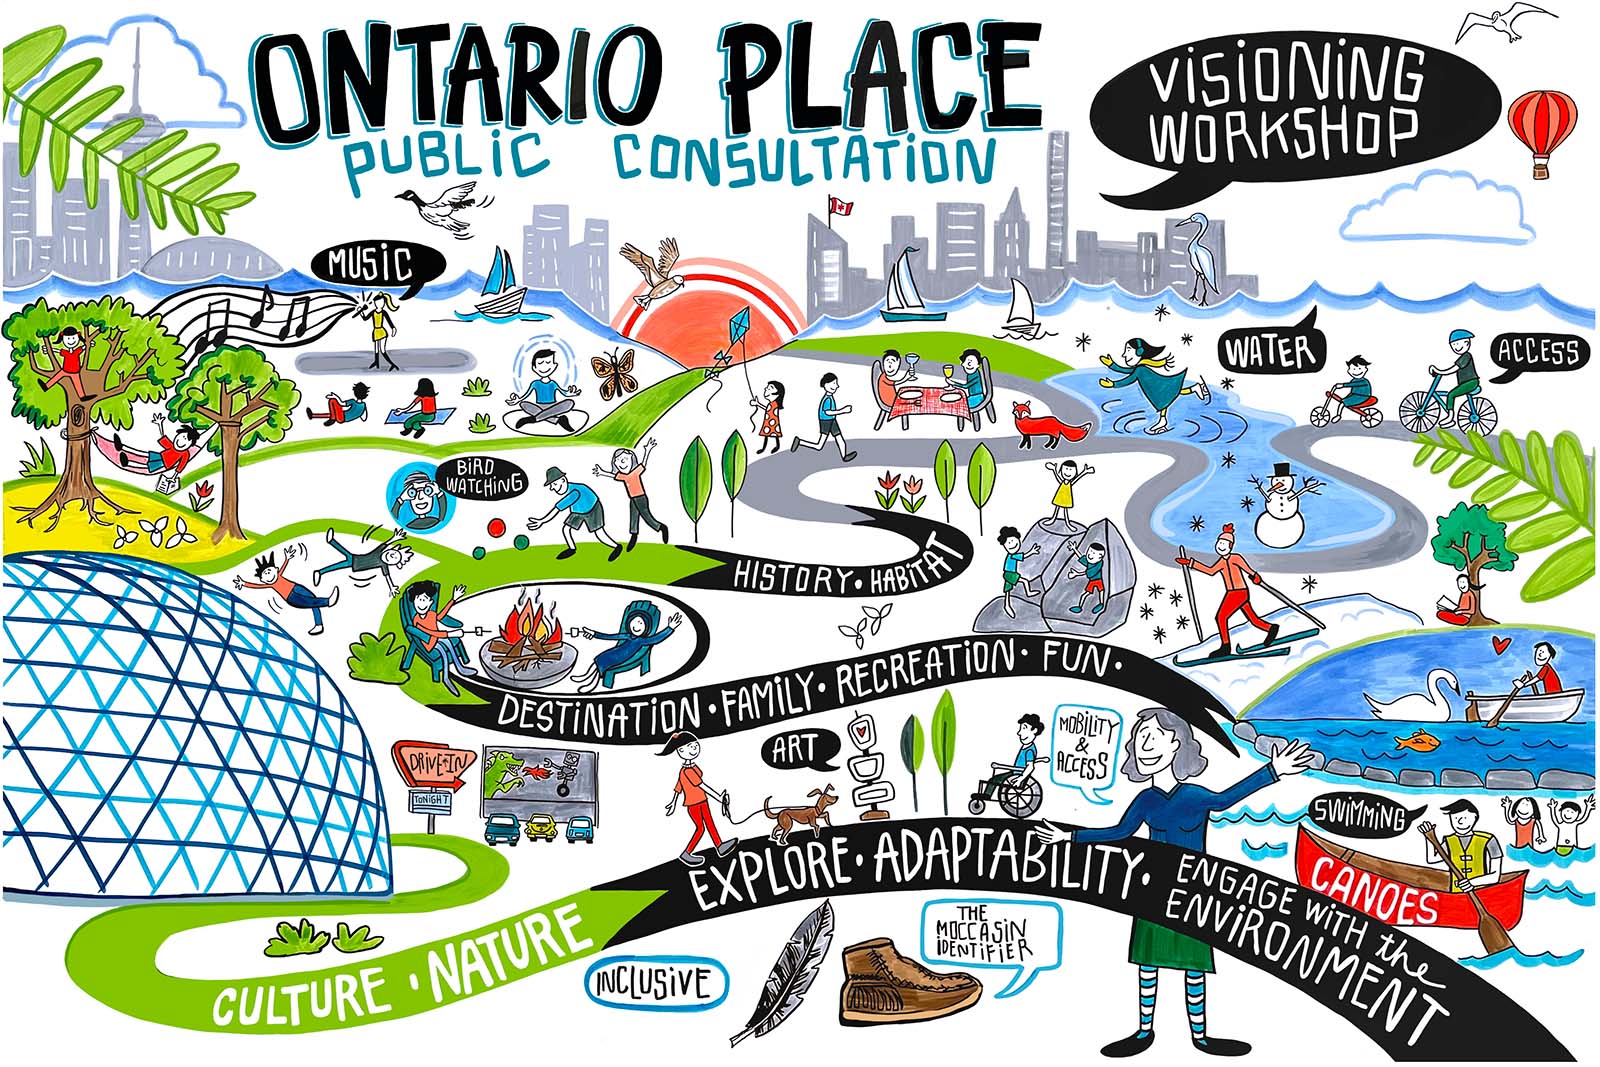 Hand drawn illustration  with Toronto skyline in the background and a green landscape scene in the foreground showing people enjoying activies such as bird watching, art, swimming and music. The title reads Ontario Place Public Consultation Visioning Workshop.